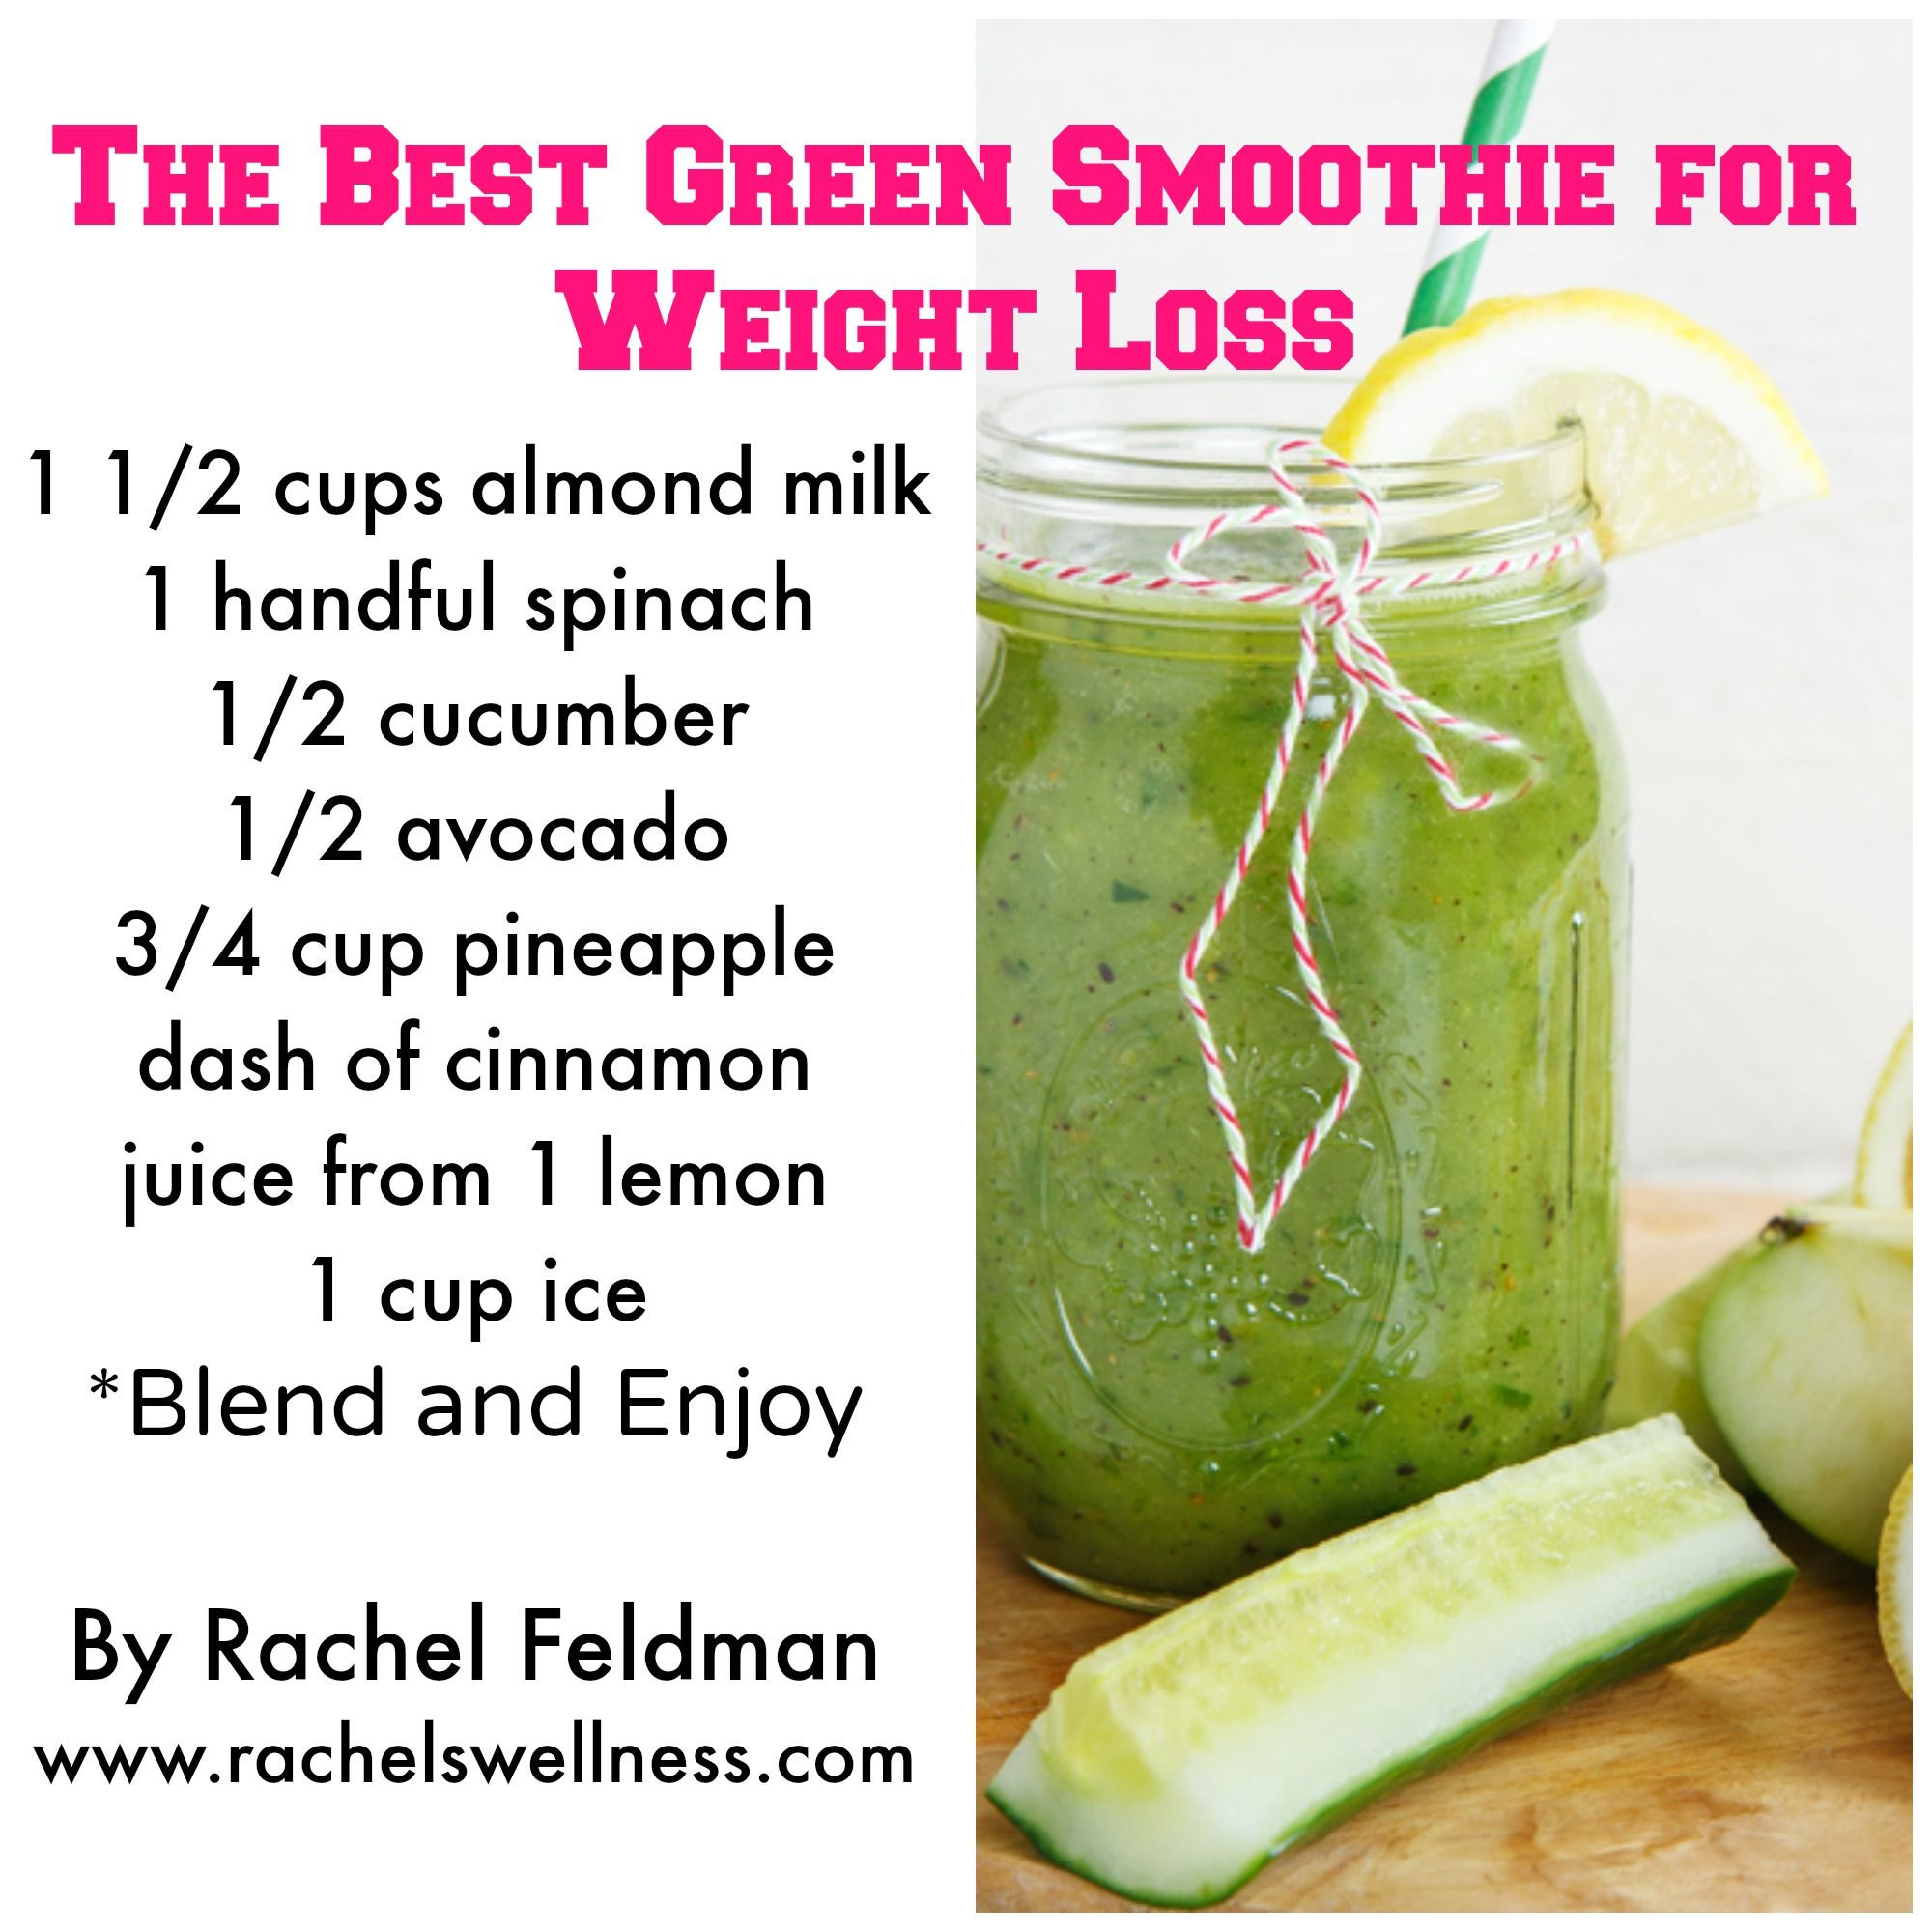 Healthy Smoothies To Lose Weight
 7 Healthy Green Smoothie Recipes For Weight Loss